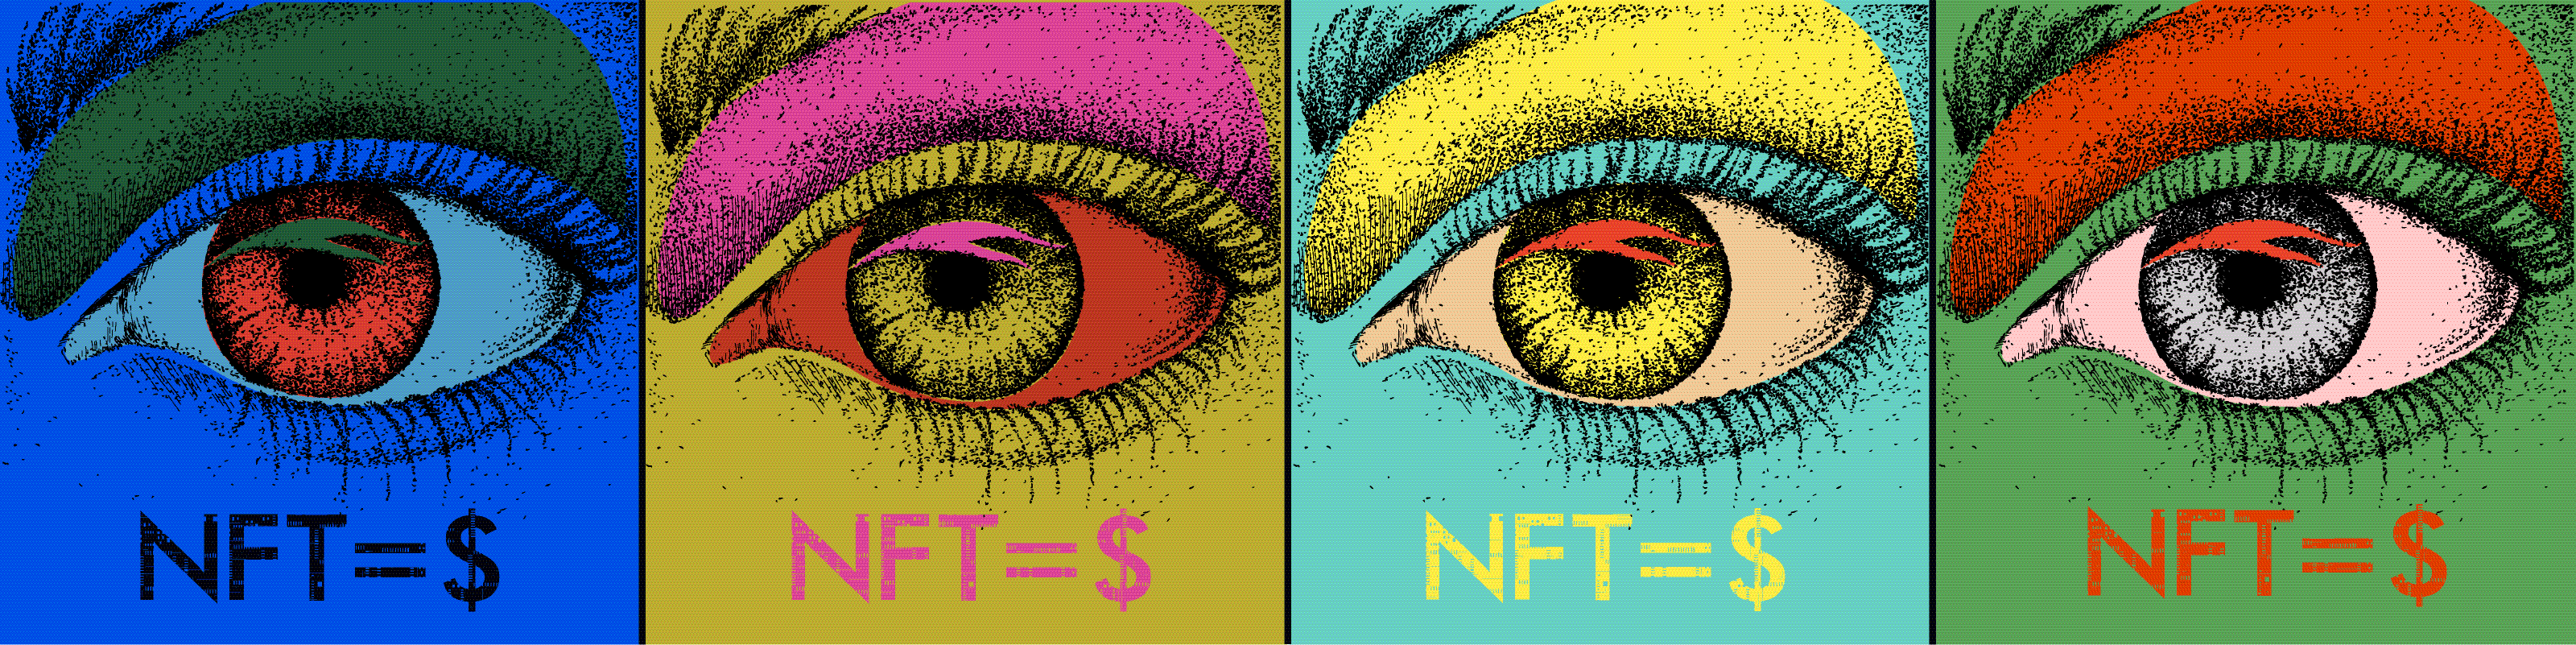 What the Heck Is an NFT? - Jewcy